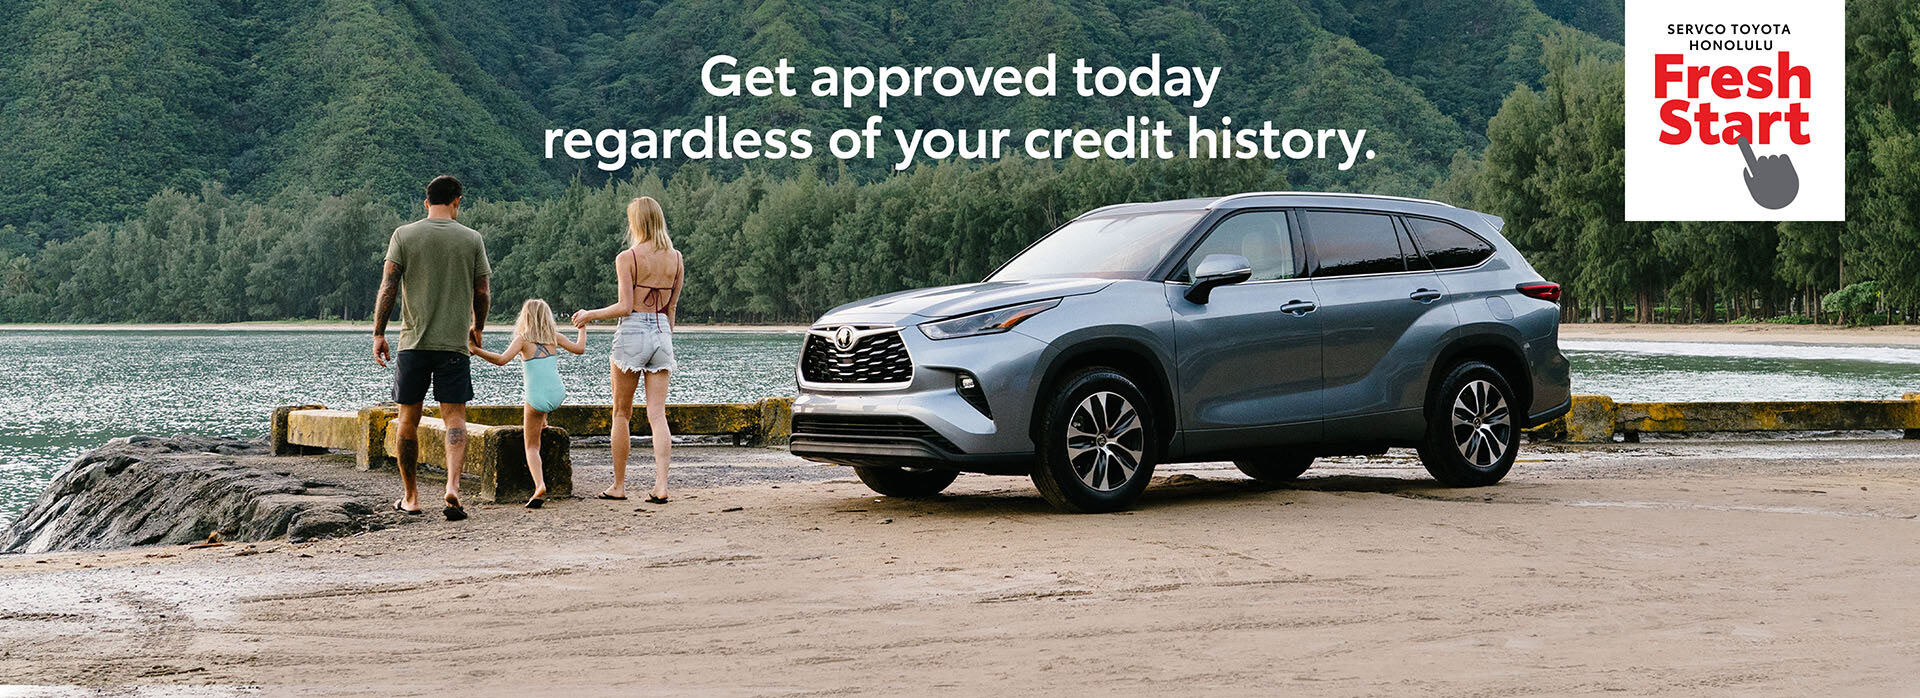 Get approved today regardless of your credit history.